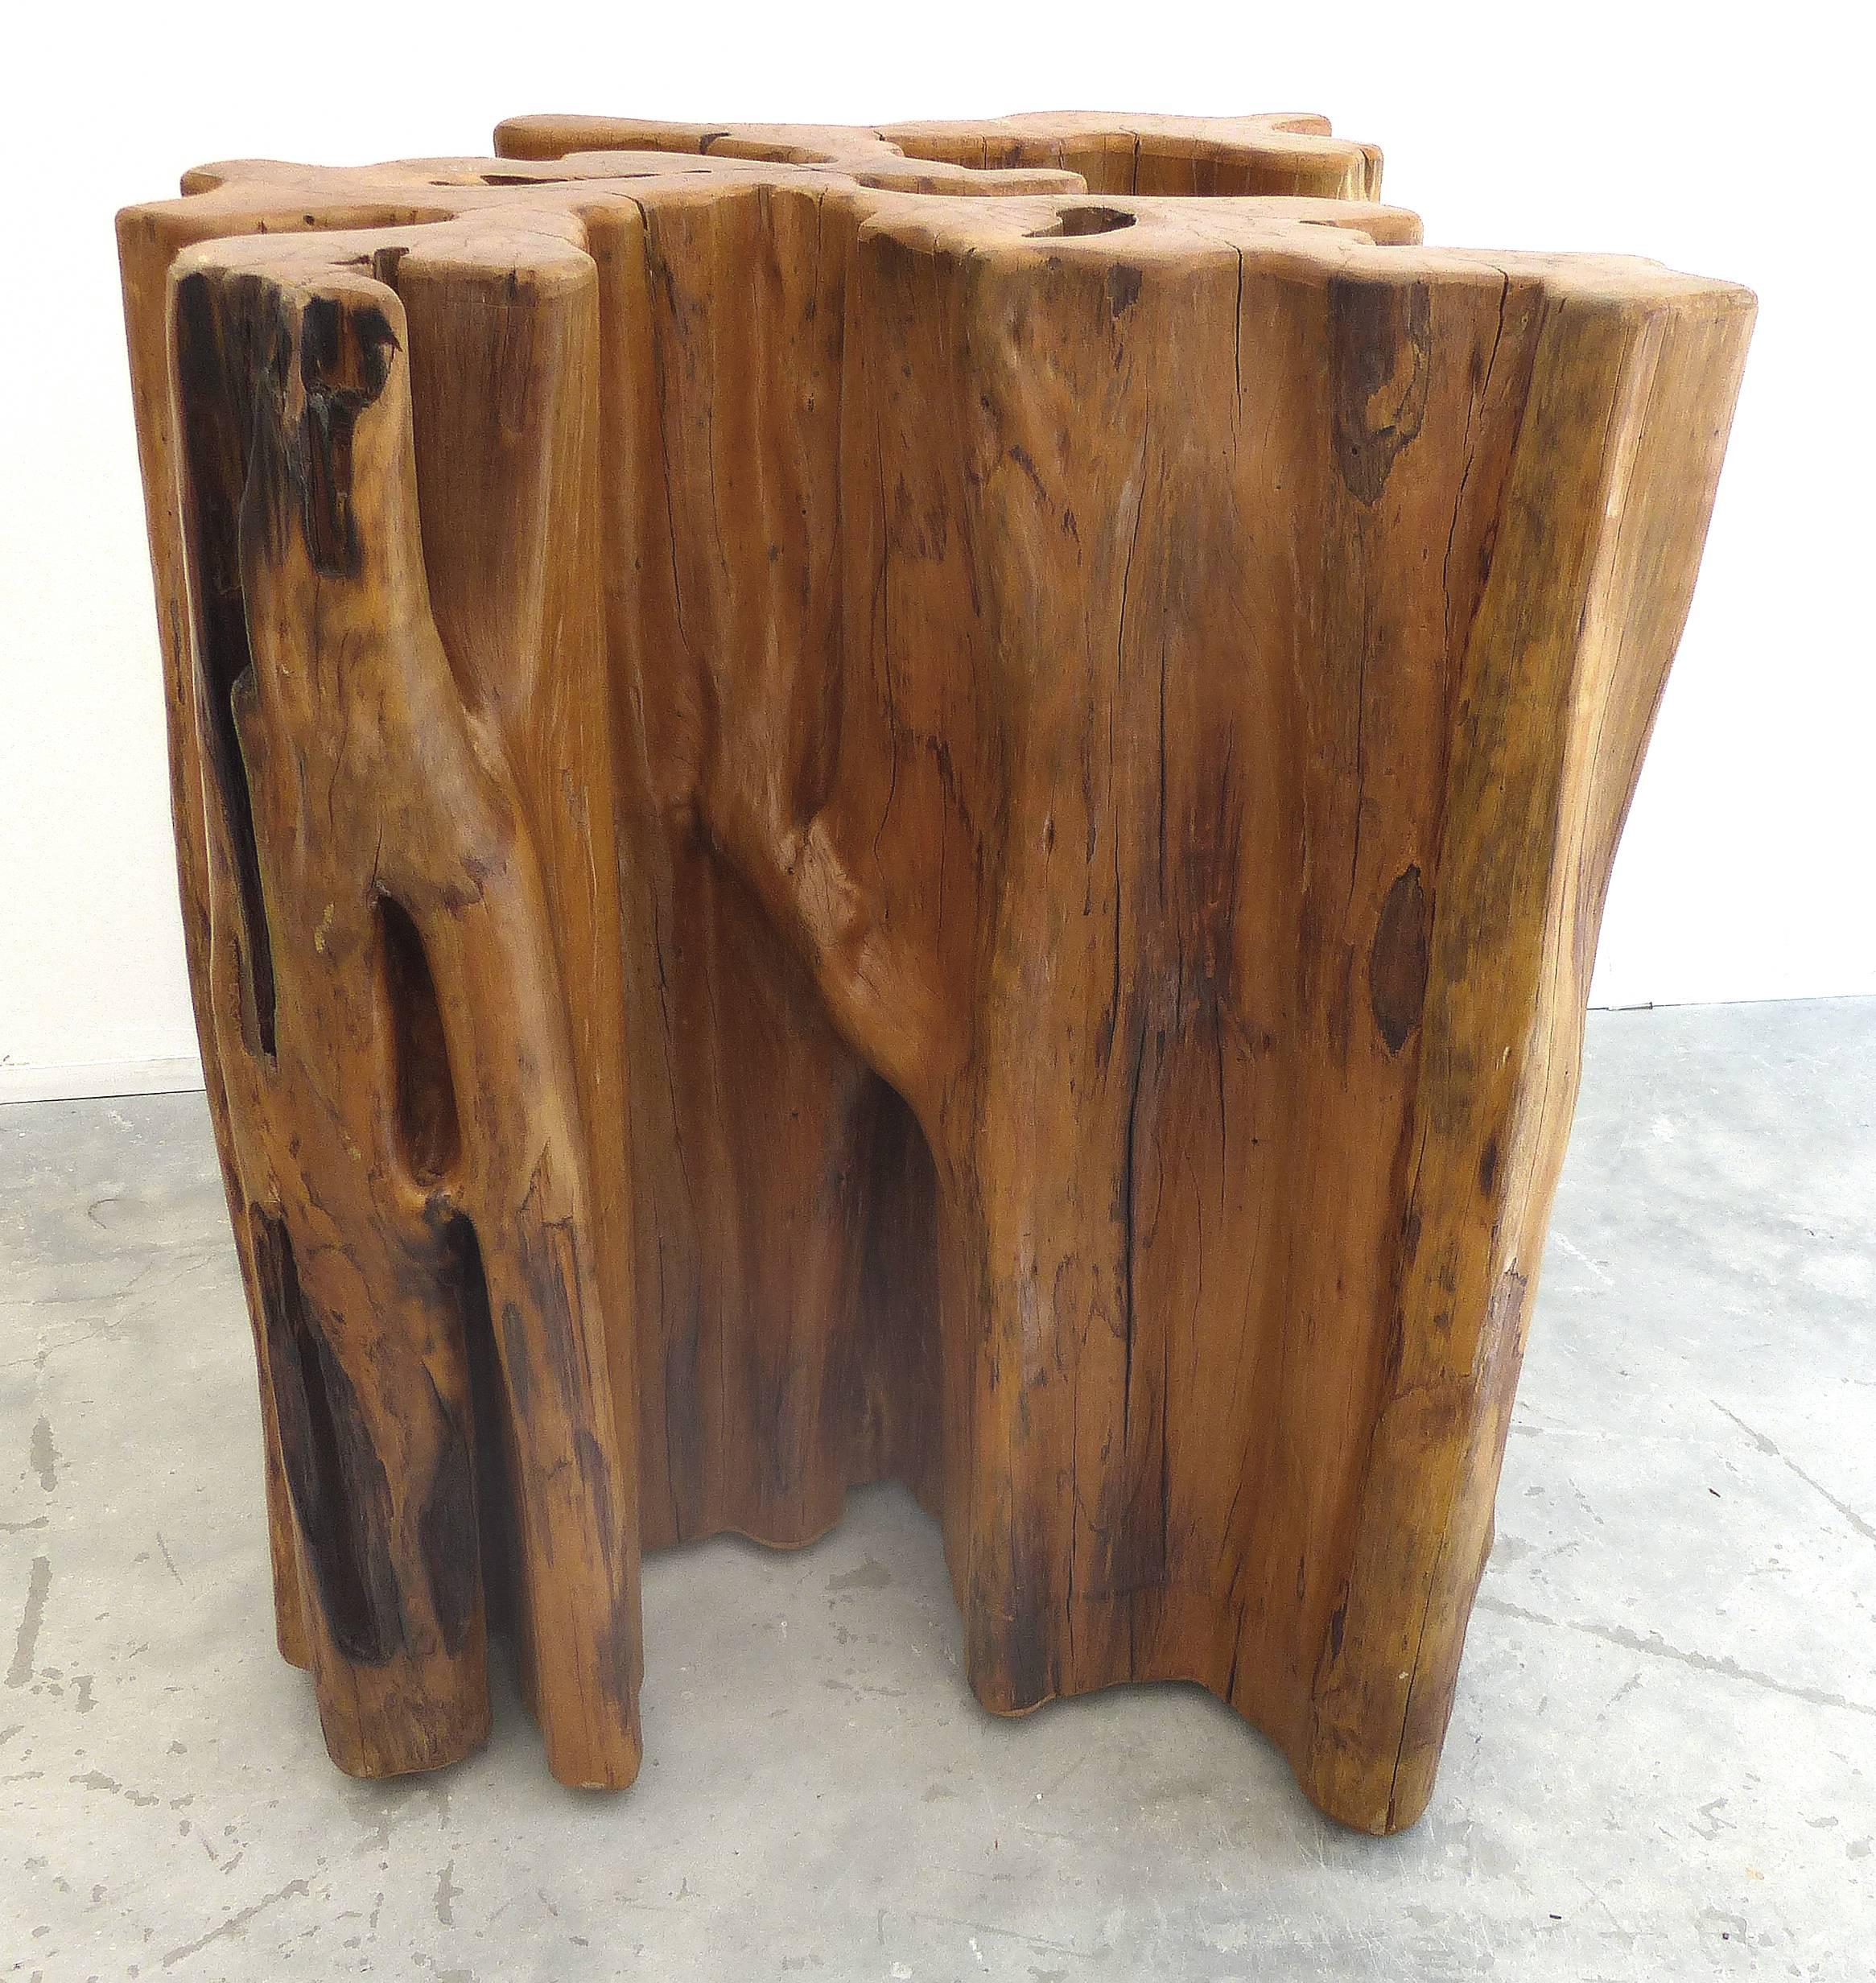 Sculptural Amazon Guaranta Table Base from Brazilian Artist Valeria Totti

Offered is a table base of reclaimed wood from the Brazilian Amazon. 
The species of this wood is Esenbeckia leiocarpa. A semideciduous tree with a dense, rounded crown; it